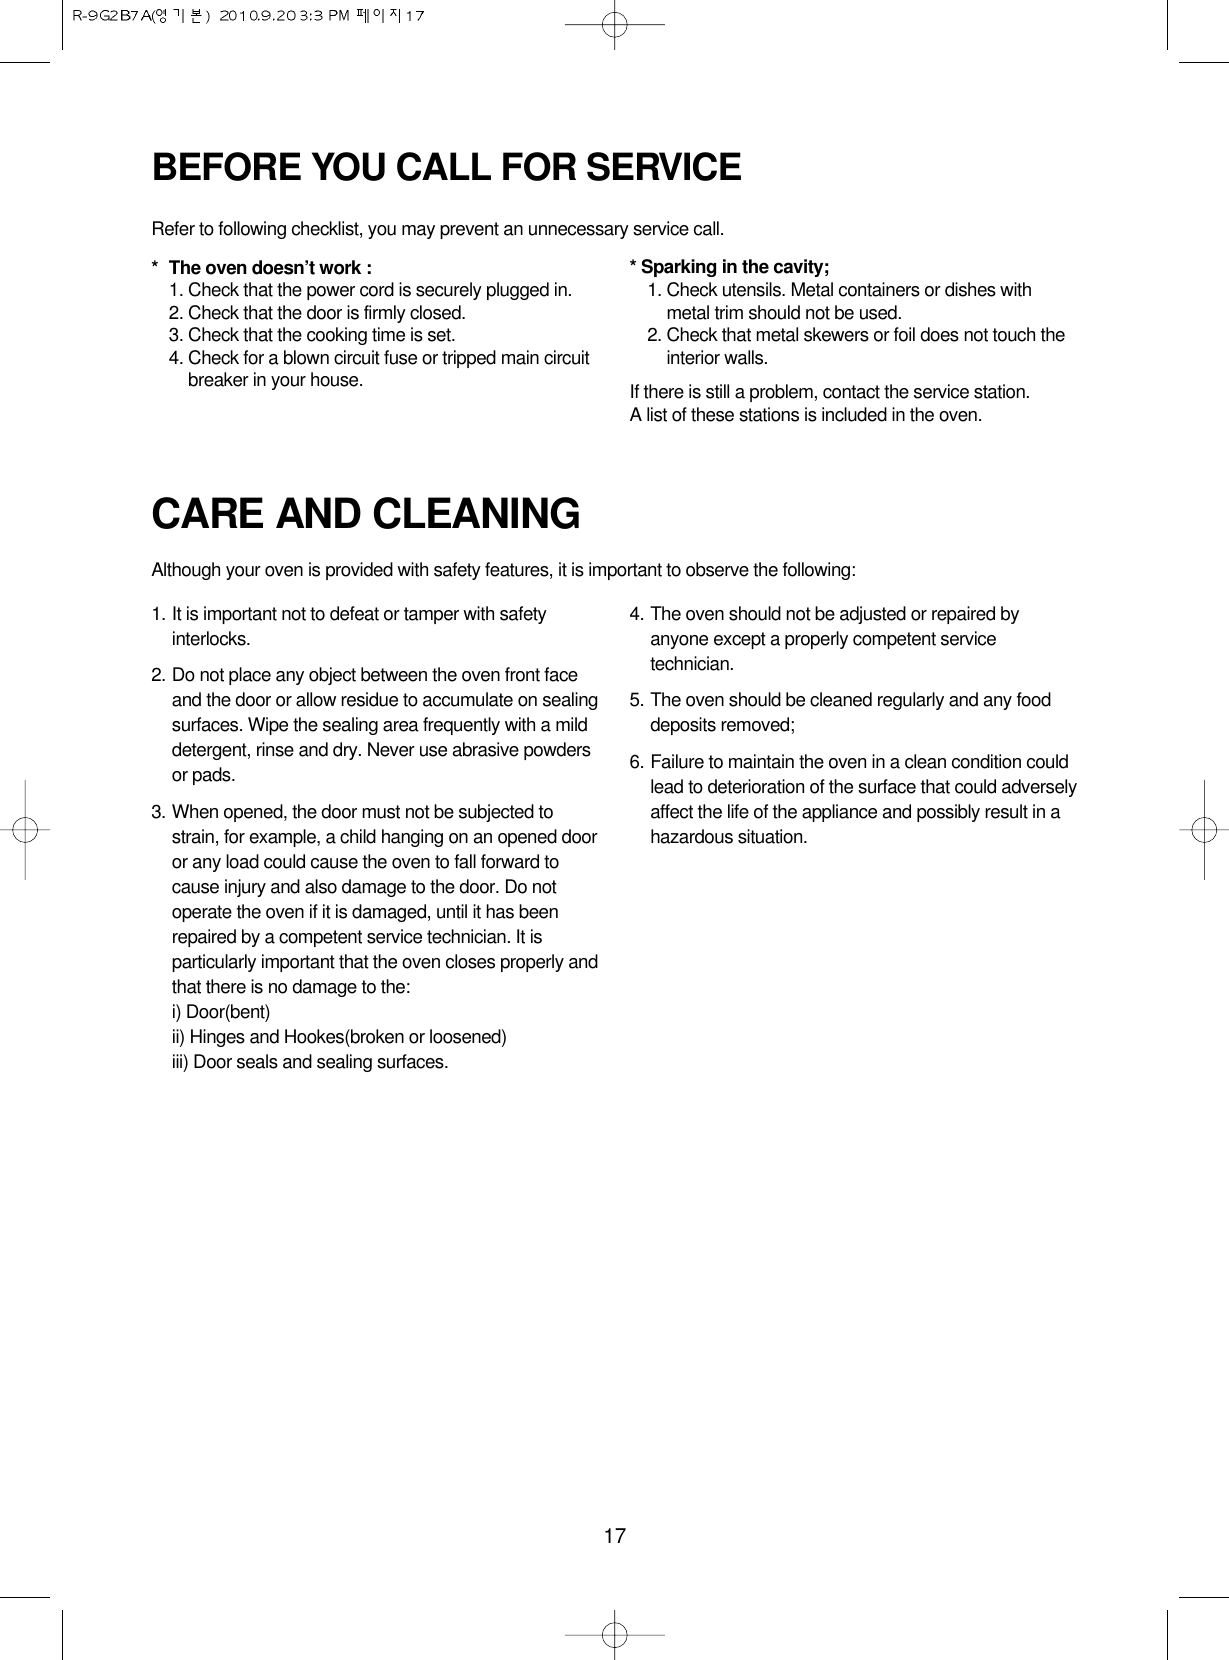 17CARE AND CLEANINGAlthough your oven is provided with safety features, it is important to observe the following:1. It is important not to defeat or tamper with safetyinterlocks.2. Do not place any object between the oven front faceand the door or allow residue to accumulate on sealingsurfaces. Wipe the sealing area frequently with a milddetergent, rinse and dry. Never use abrasive powdersor pads.3. When opened, the door must not be subjected tostrain, for example, a child hanging on an opened dooror any load could cause the oven to fall forward tocause injury and also damage to the door. Do notoperate the oven if it is damaged, until it has beenrepaired by a competent service technician. It isparticularly important that the oven closes properly andthat there is no damage to the:i) Door(bent)ii) Hinges and Hookes(broken or loosened)iii) Door seals and sealing surfaces.4. The oven should not be adjusted or repaired byanyone except a properly competent servicetechnician.5. The oven should be cleaned regularly and any fooddeposits removed;6. Failure to maintain the oven in a clean condition couldlead to deterioration of the surface that could adverselyaffect the life of the appliance and possibly result in ahazardous situation.BEFORE YOU CALL FOR SERVICERefer to following checklist, you may prevent an unnecessary service call.*The oven doesn’t work :1. Check that the power cord is securely plugged in.2. Check that the door is firmly closed.3. Check that the cooking time is set.4. Check for a blown circuit fuse or tripped main circuitbreaker in your house.* Sparking in the cavity;1. Check utensils. Metal containers or dishes withmetal trim should not be used.2. Check that metal skewers or foil does not touch theinterior walls.If there is still a problem, contact the service station.A list of these stations is included in the oven.